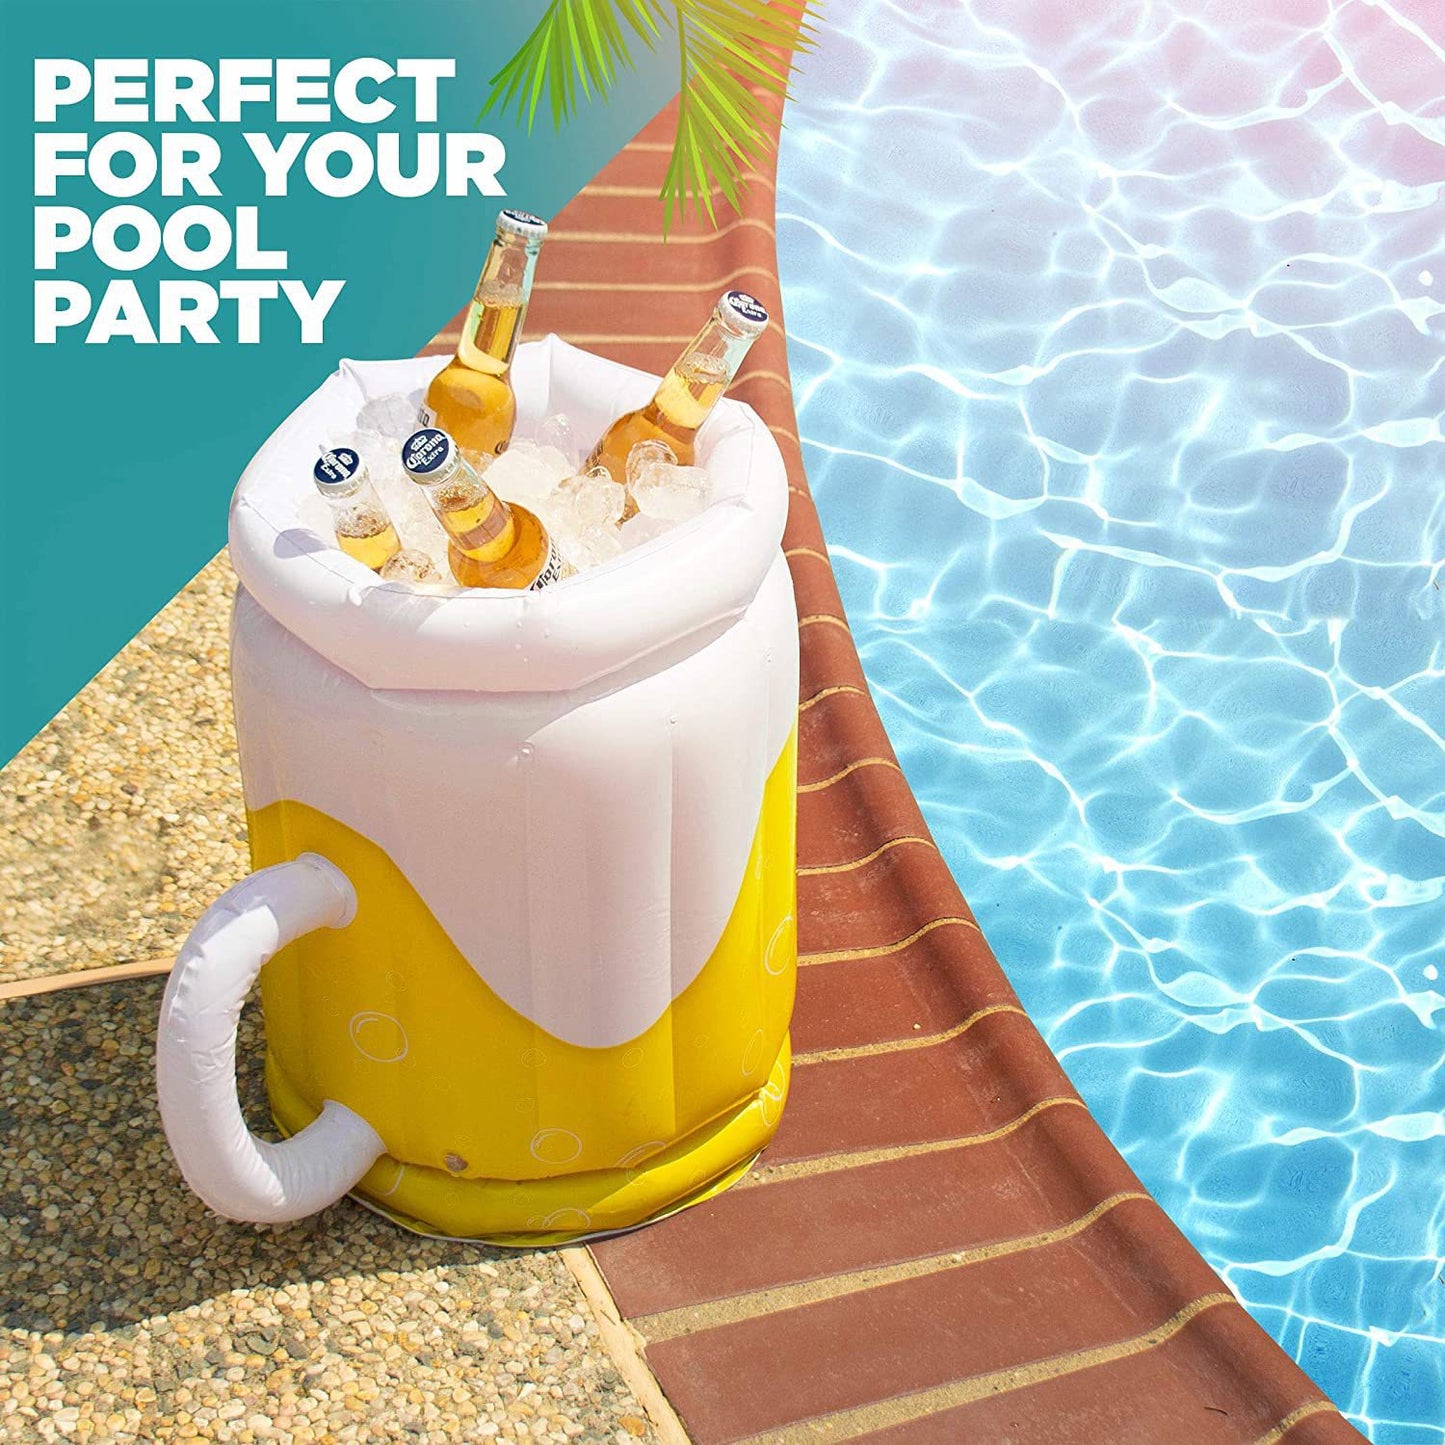 Load image into Gallery viewer, Beer Mug Cooler - Inflatable | Inflatables | PARADIS SVP
